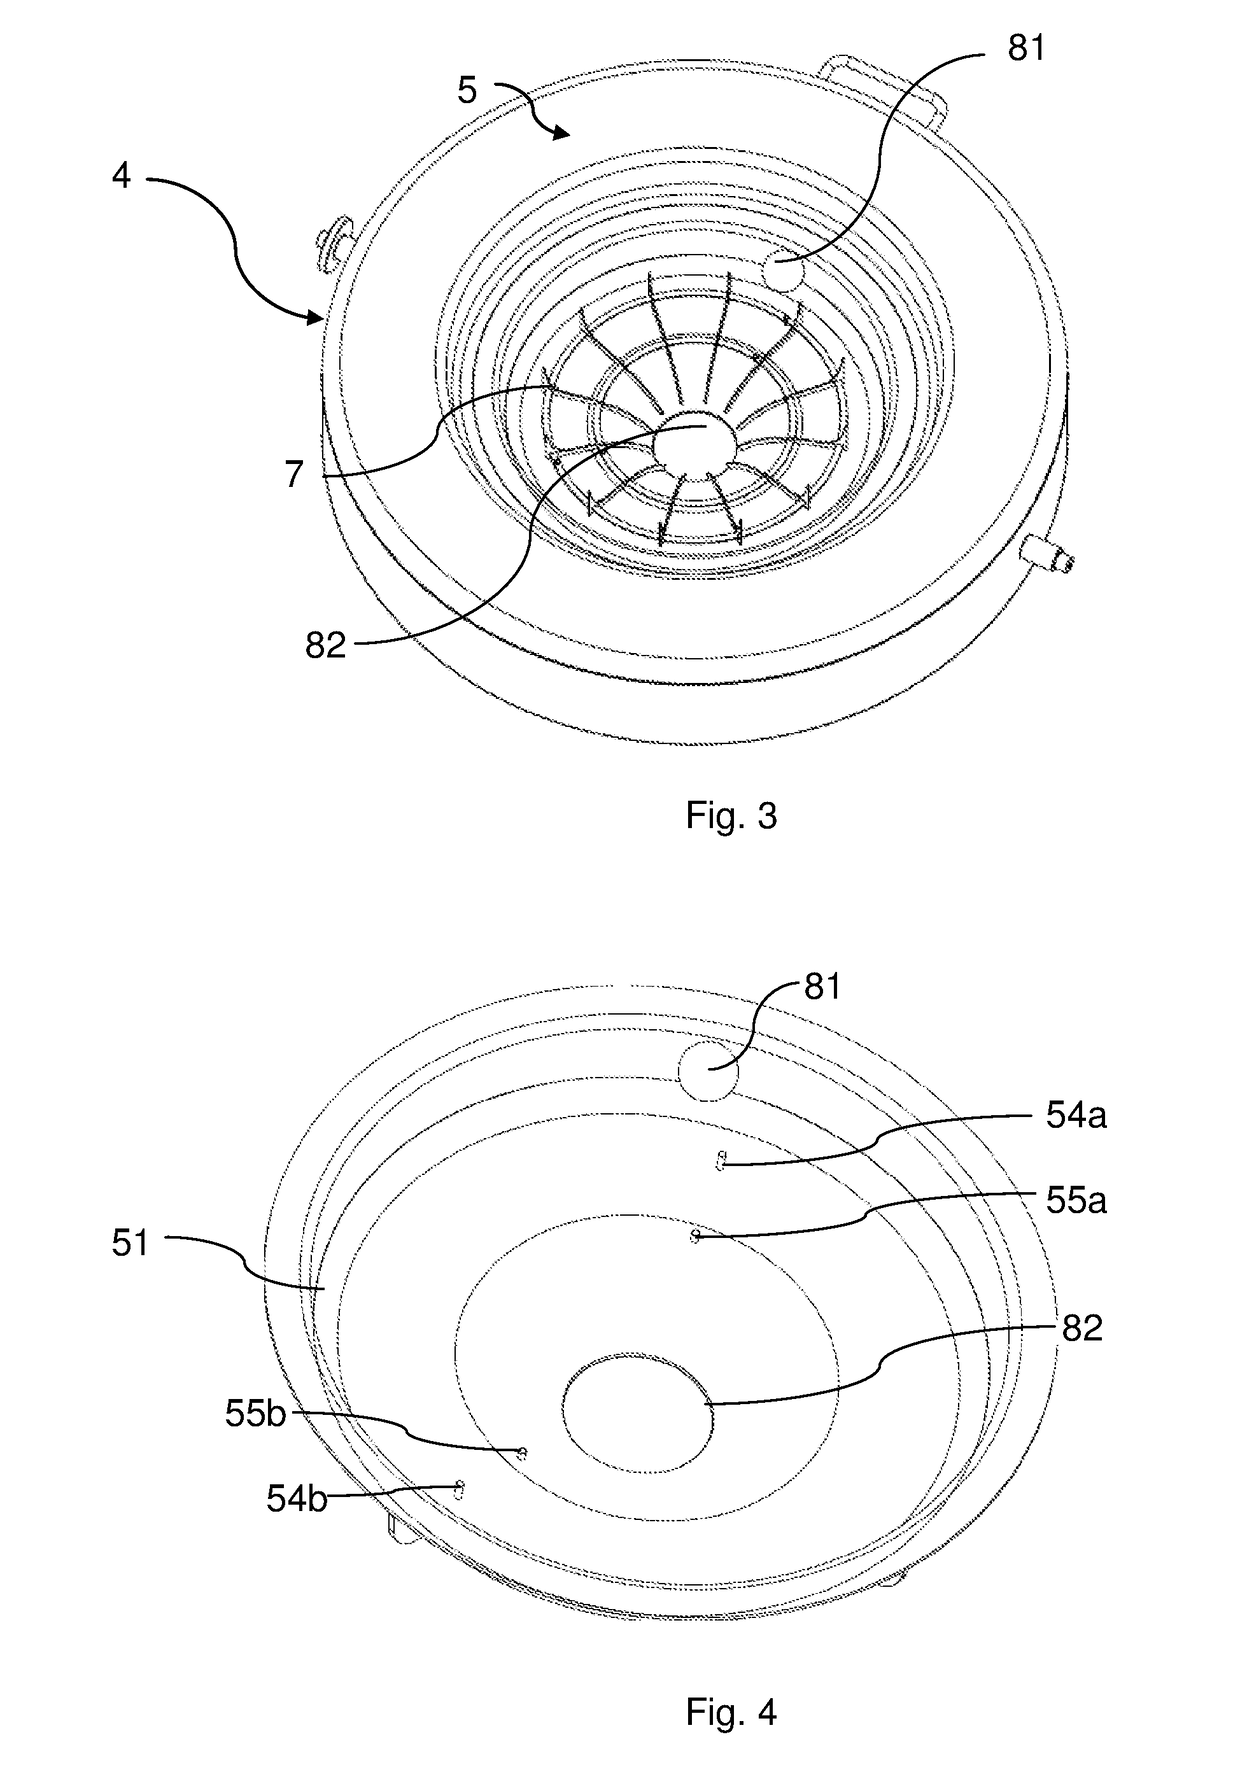 Air disperser for spray-drying, and a method for manufacturing an air disperser comprising metal forming